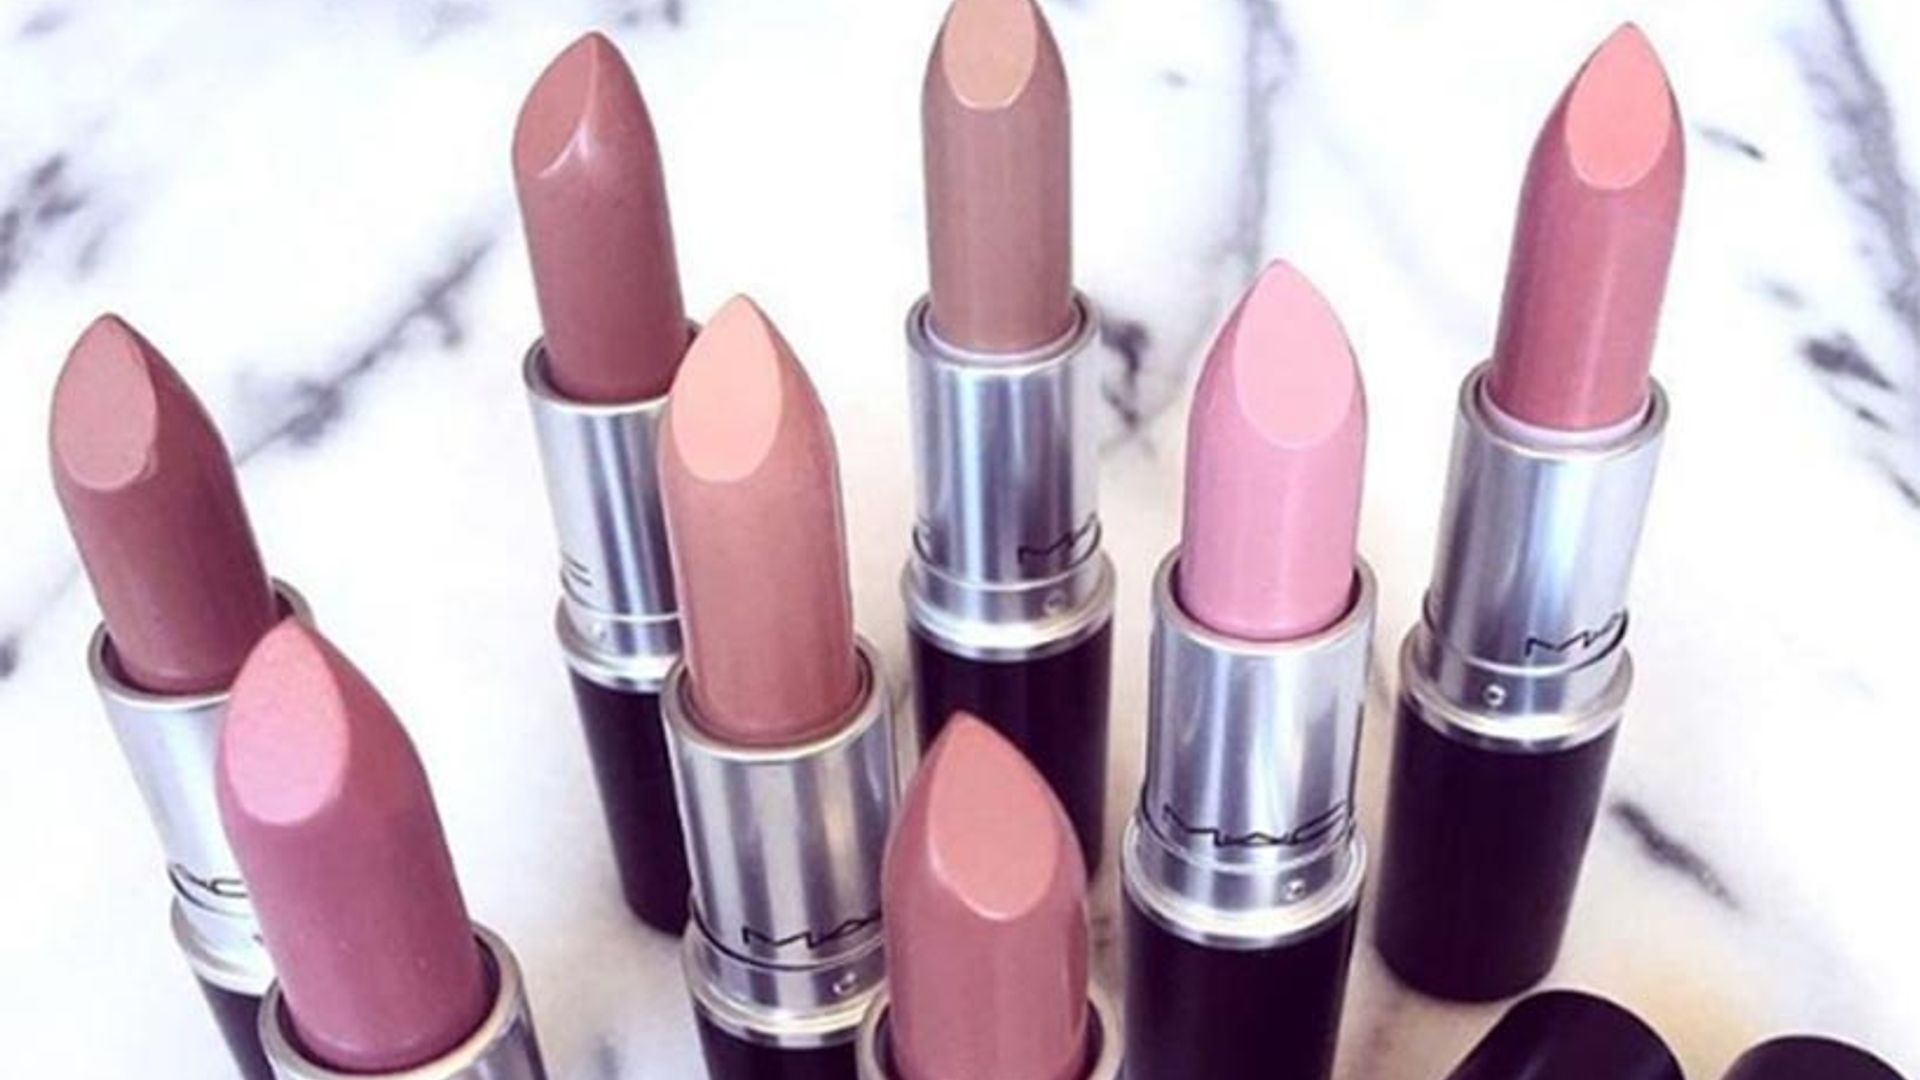 MAC collaborates with 10 global beauty influencers for new lipstick collection